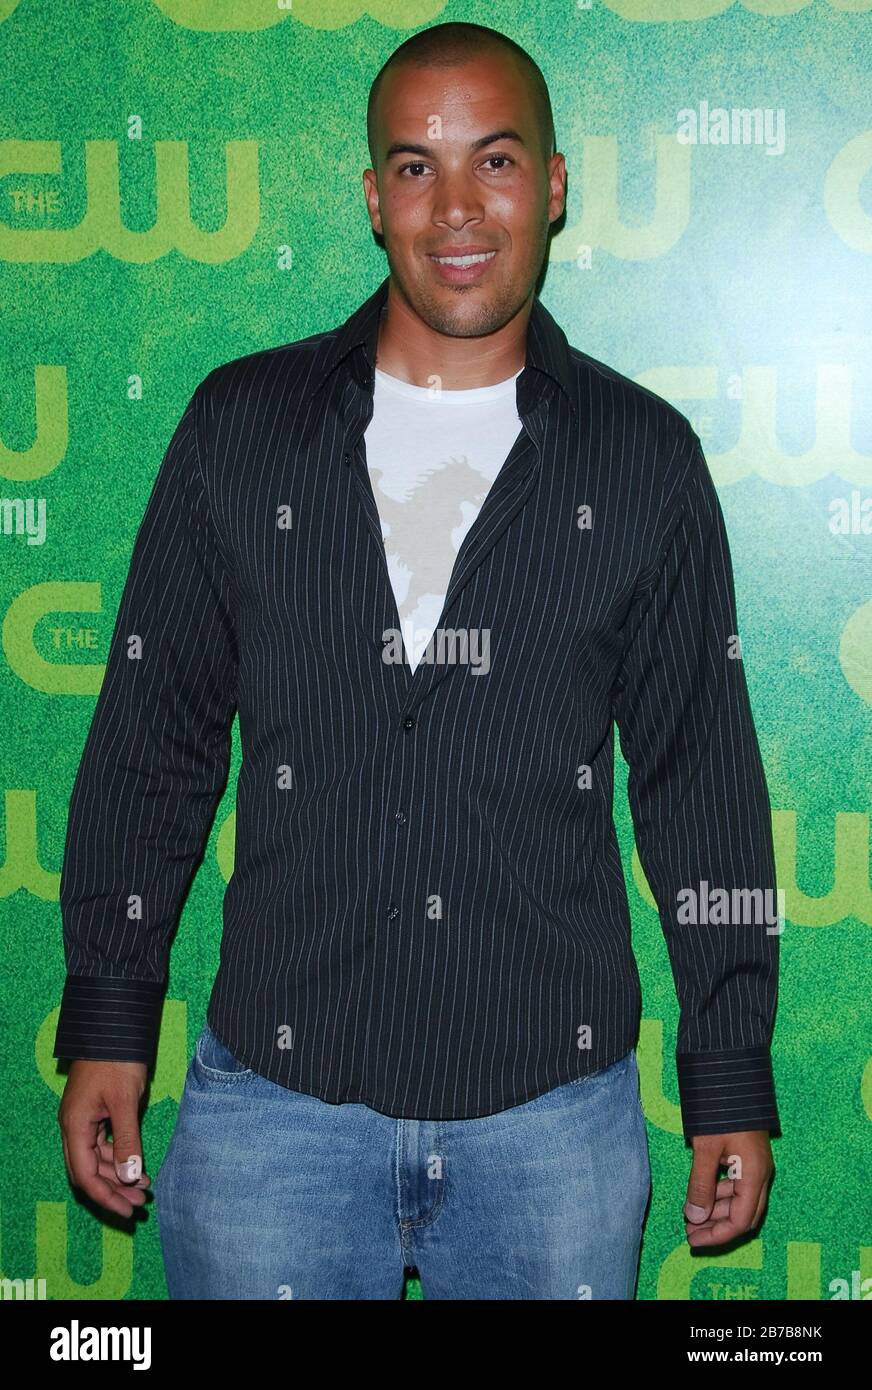 Coby Bell at The CW Television Network 2006 TCA Summer Press Tour Party held at the Ritz Carlton Hotel in Pasadena, CA. The event took place on Monday, July 17, 2006.  Photo by: SBM / PictureLux Stock Photo